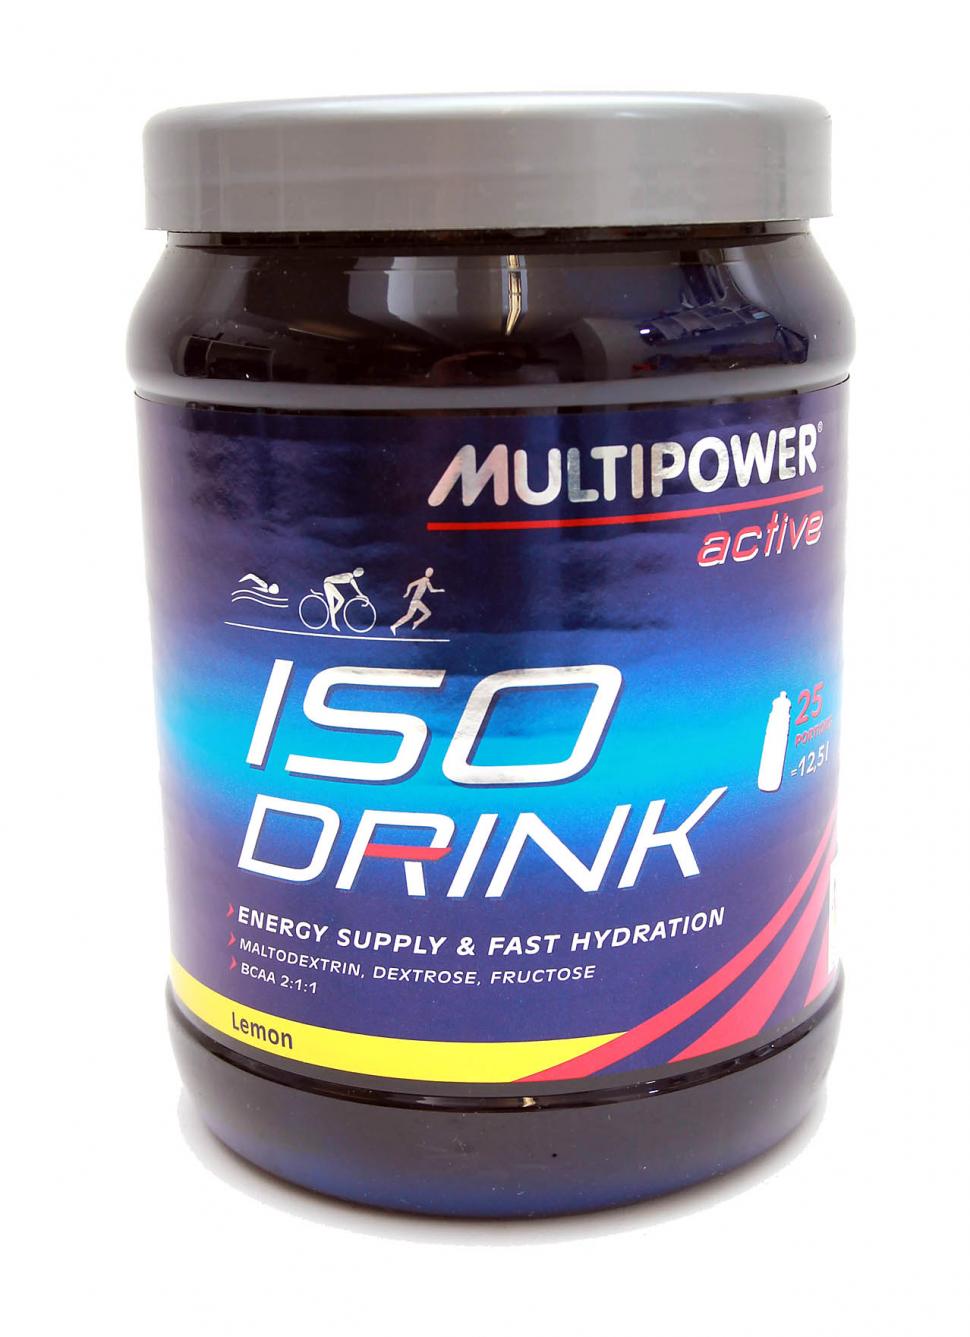 Review: Multipower Iso mix drink